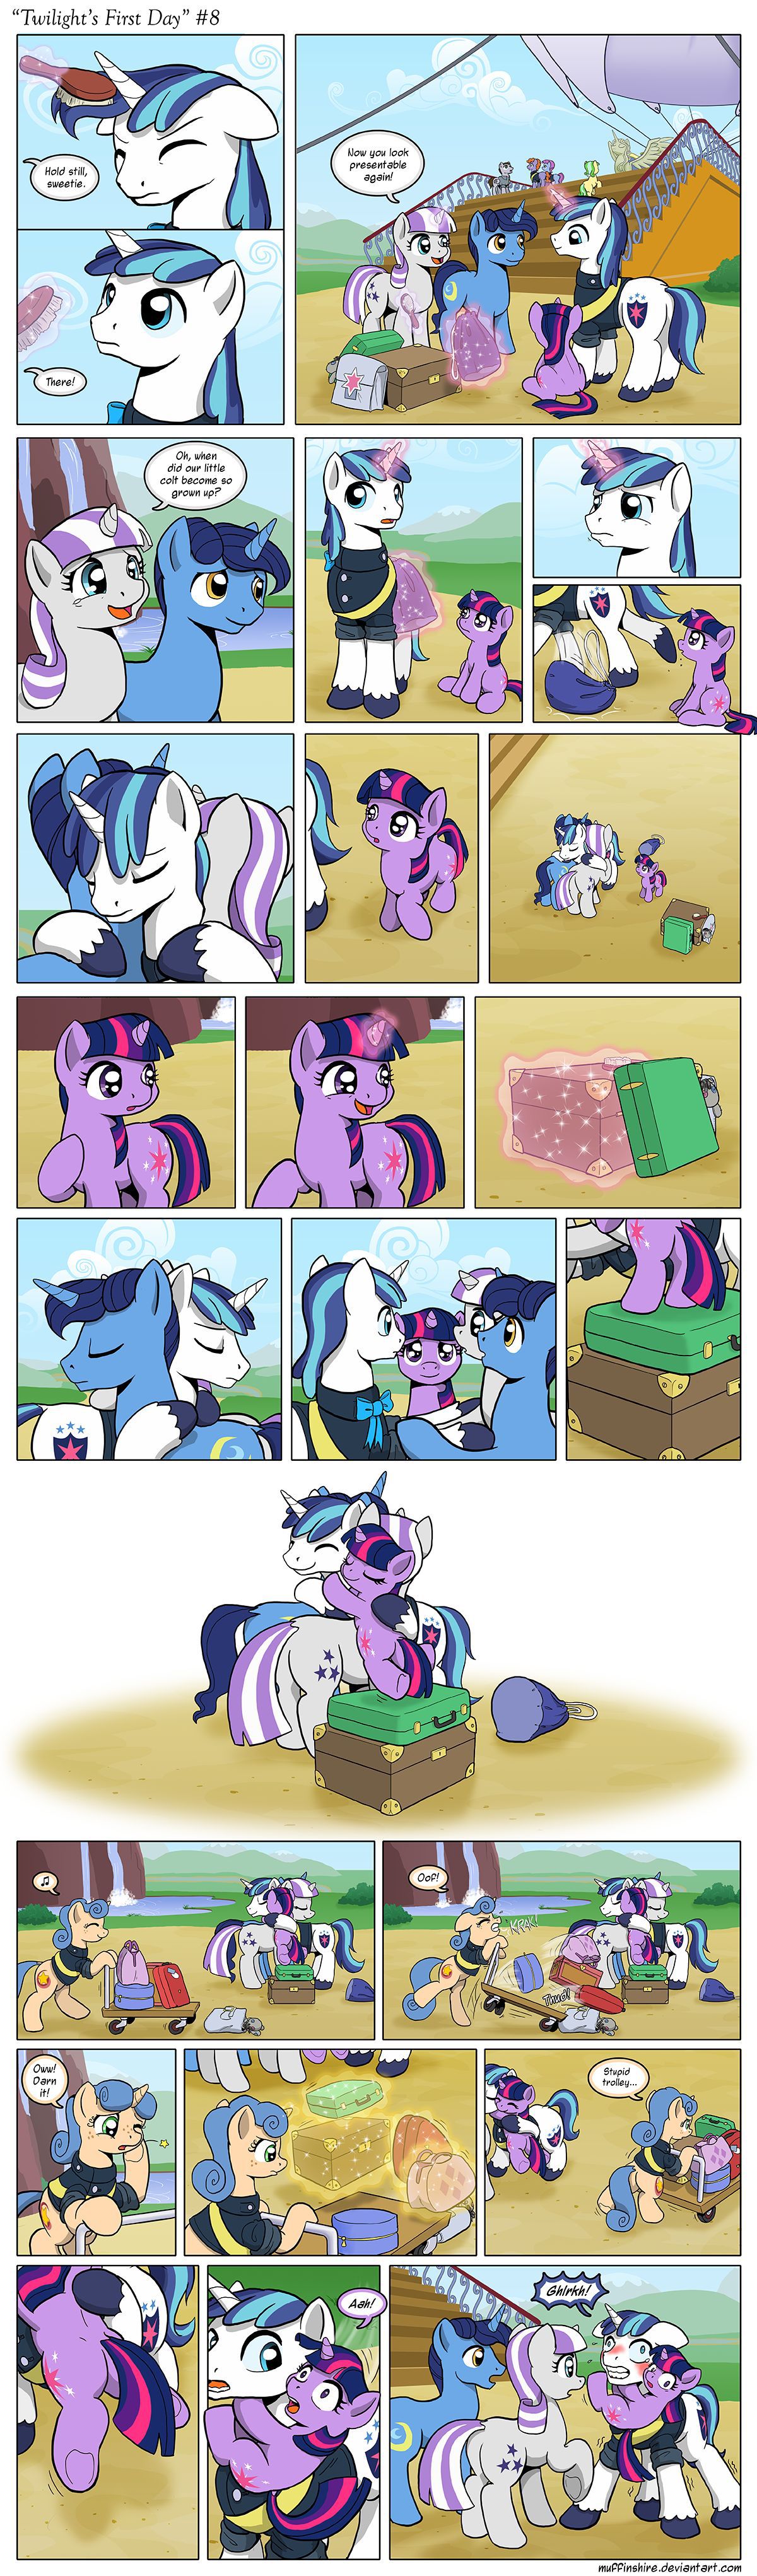 [Muffinshire] Twilight's First Day (My Little Pony: Friendship is Magic) [English] 8